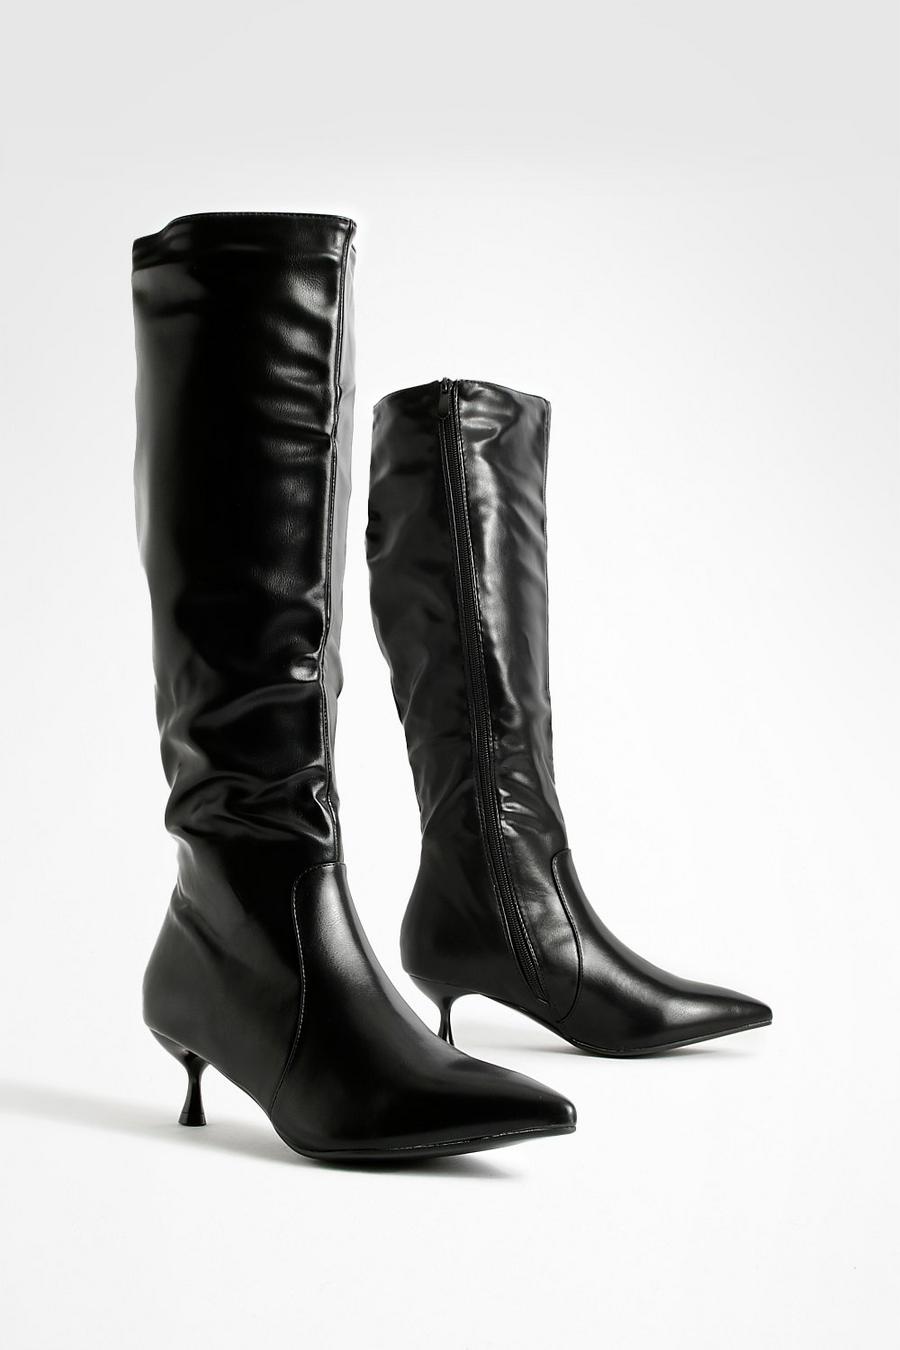 Black Low Heel Pointed Toe Knee High Boots